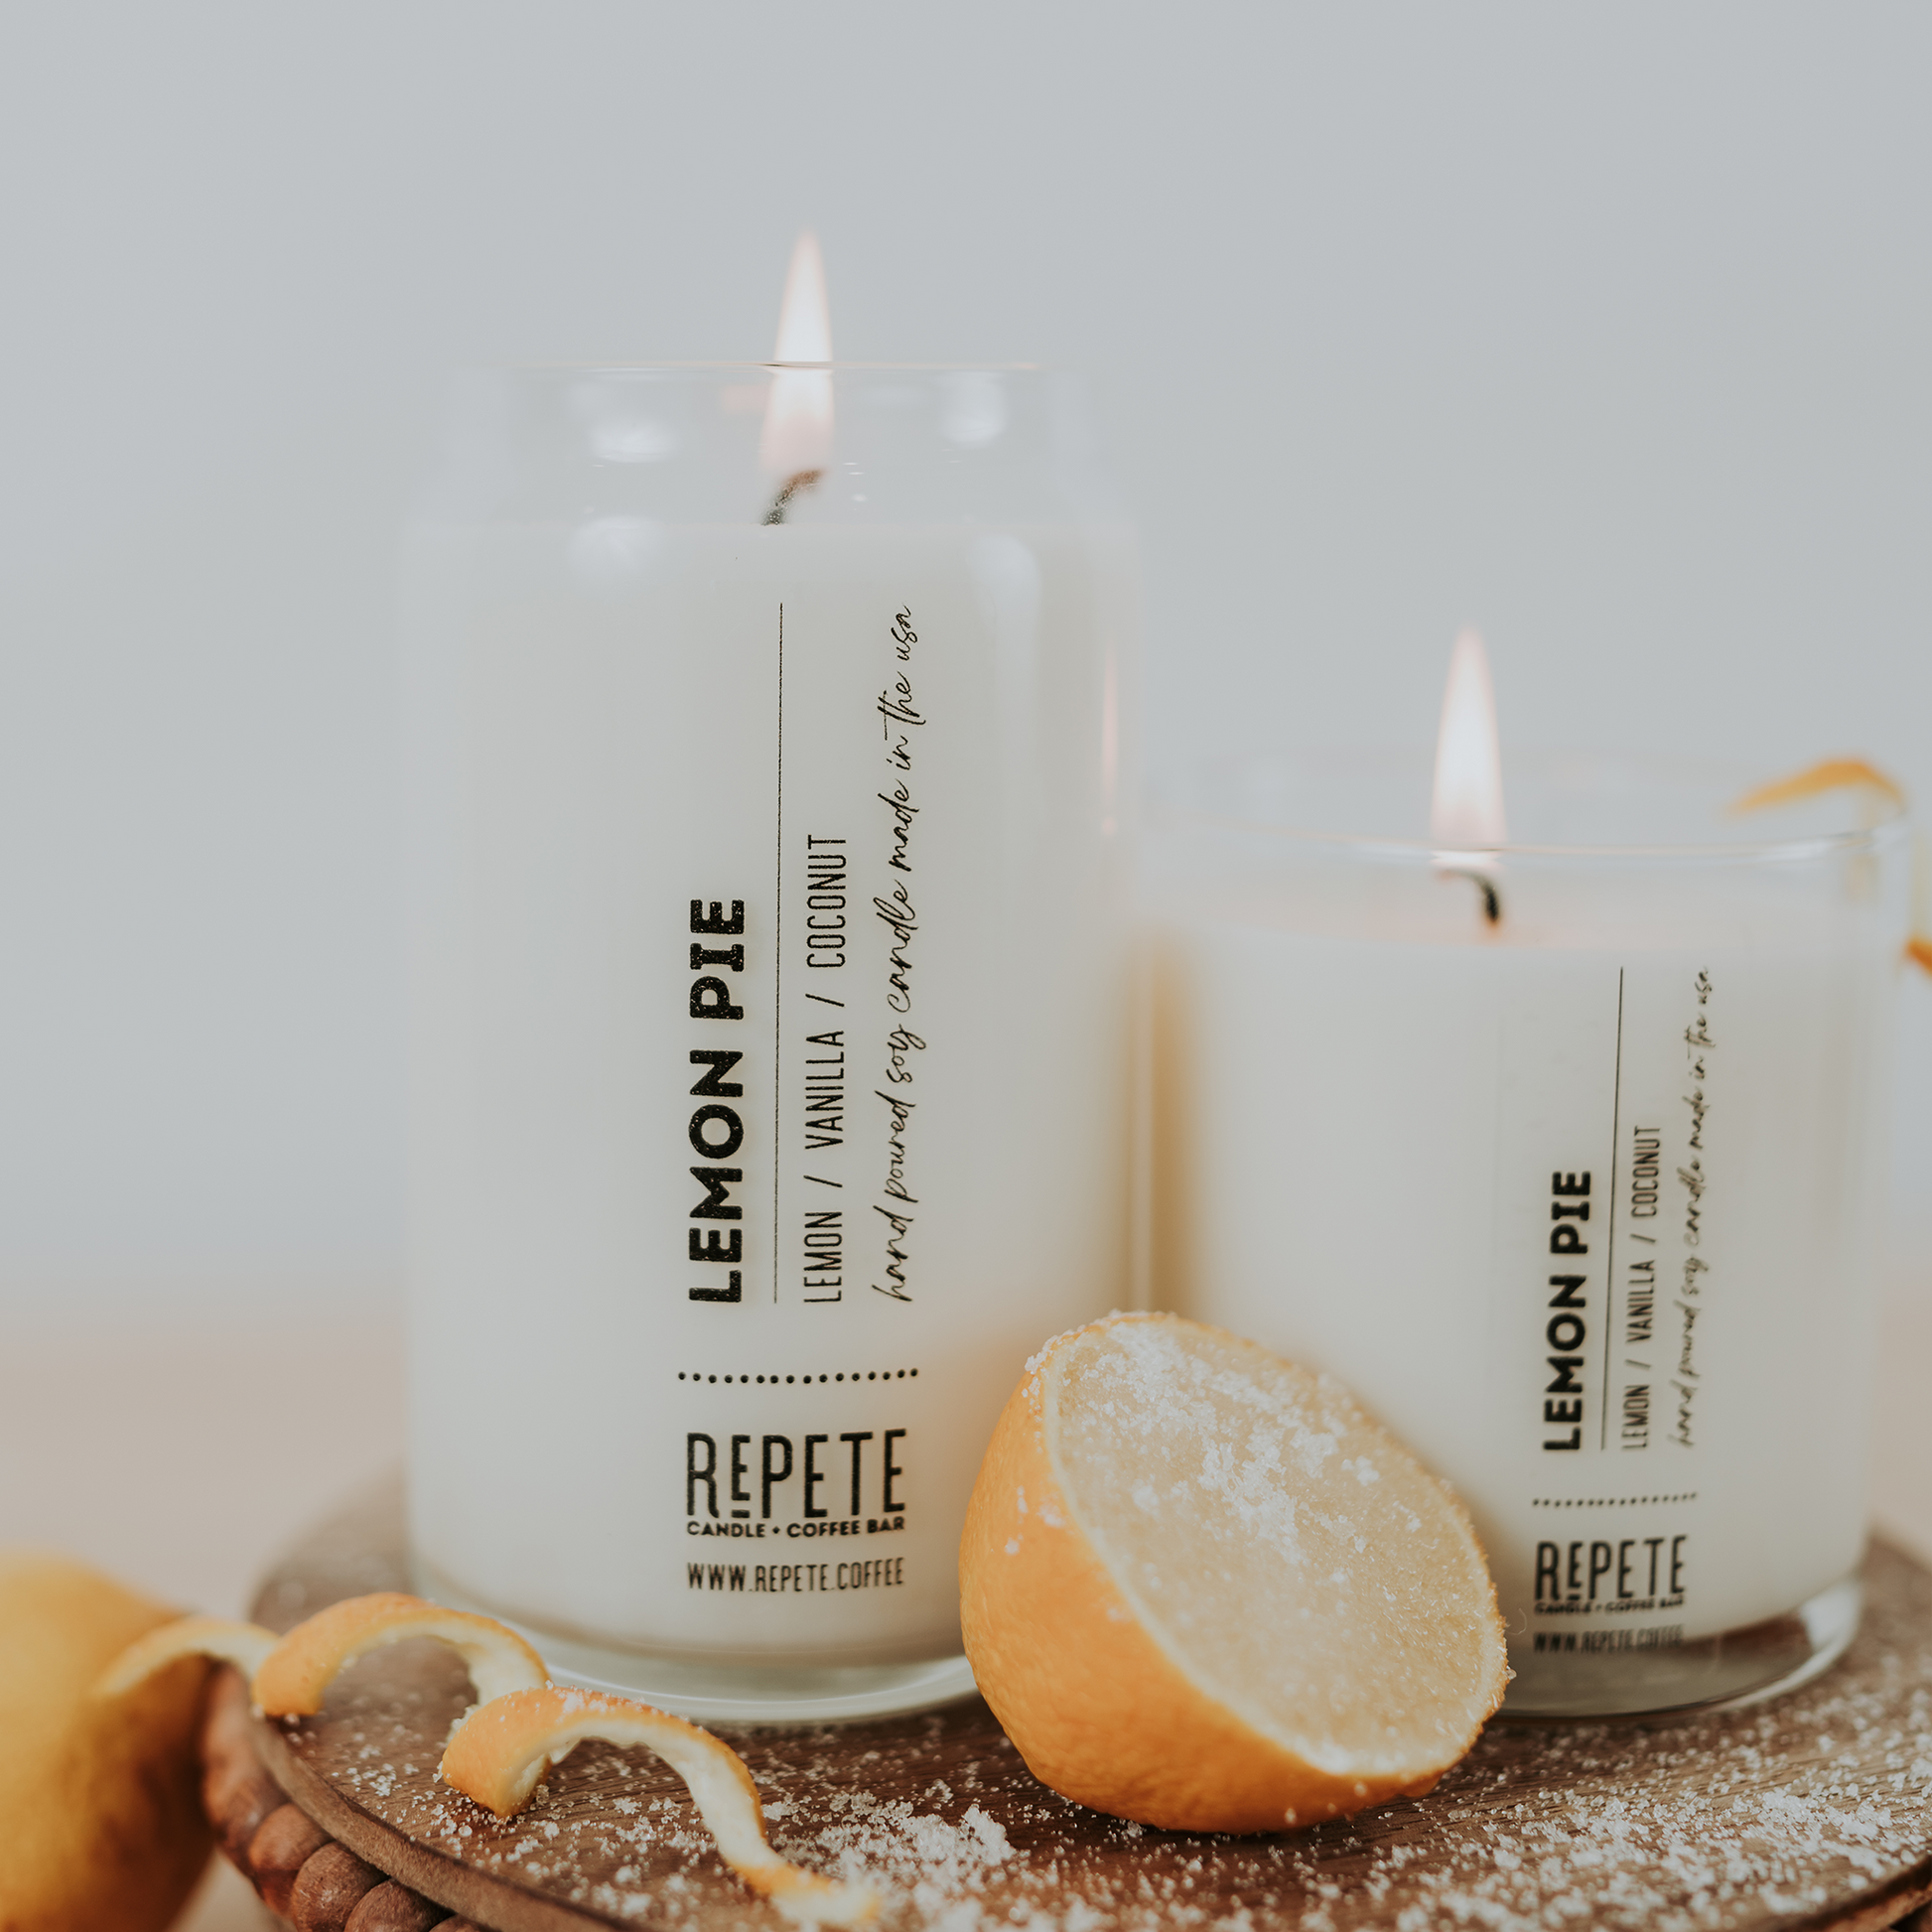 Lemon Pie candles from Repete Candle and Coffee Bar